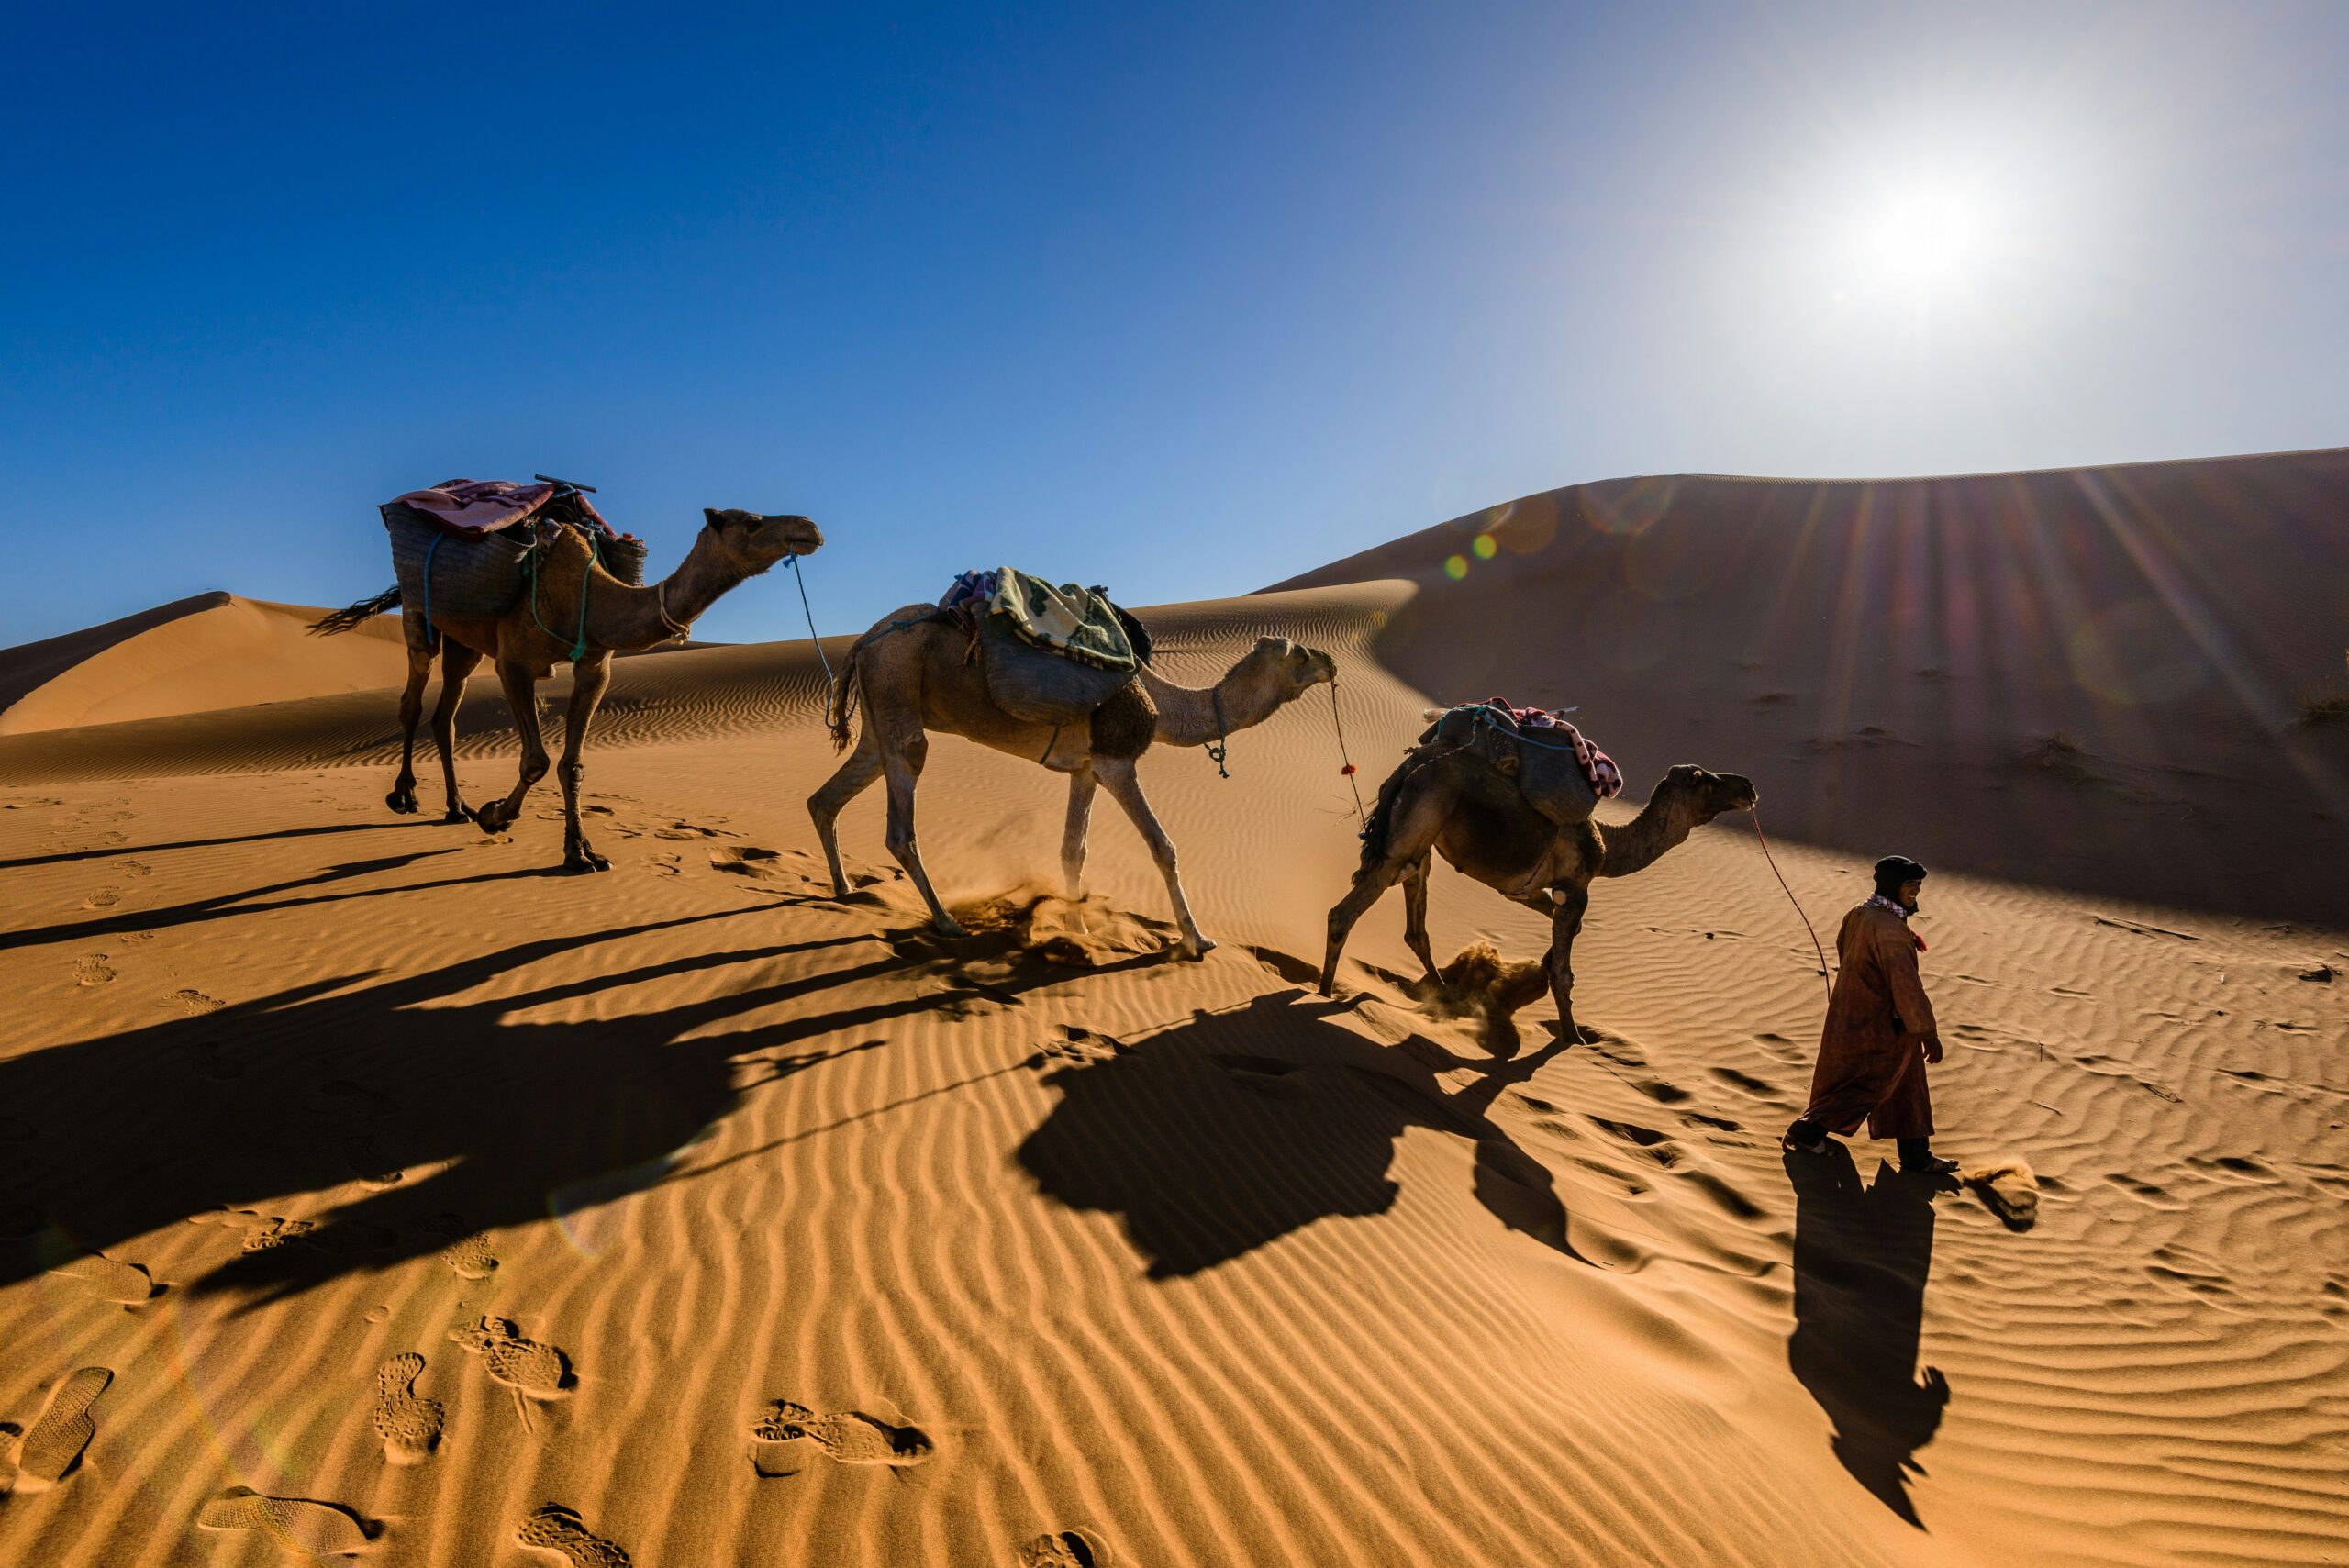 Unveiling the Magic of North Africa: A Must-Do Travel Experience